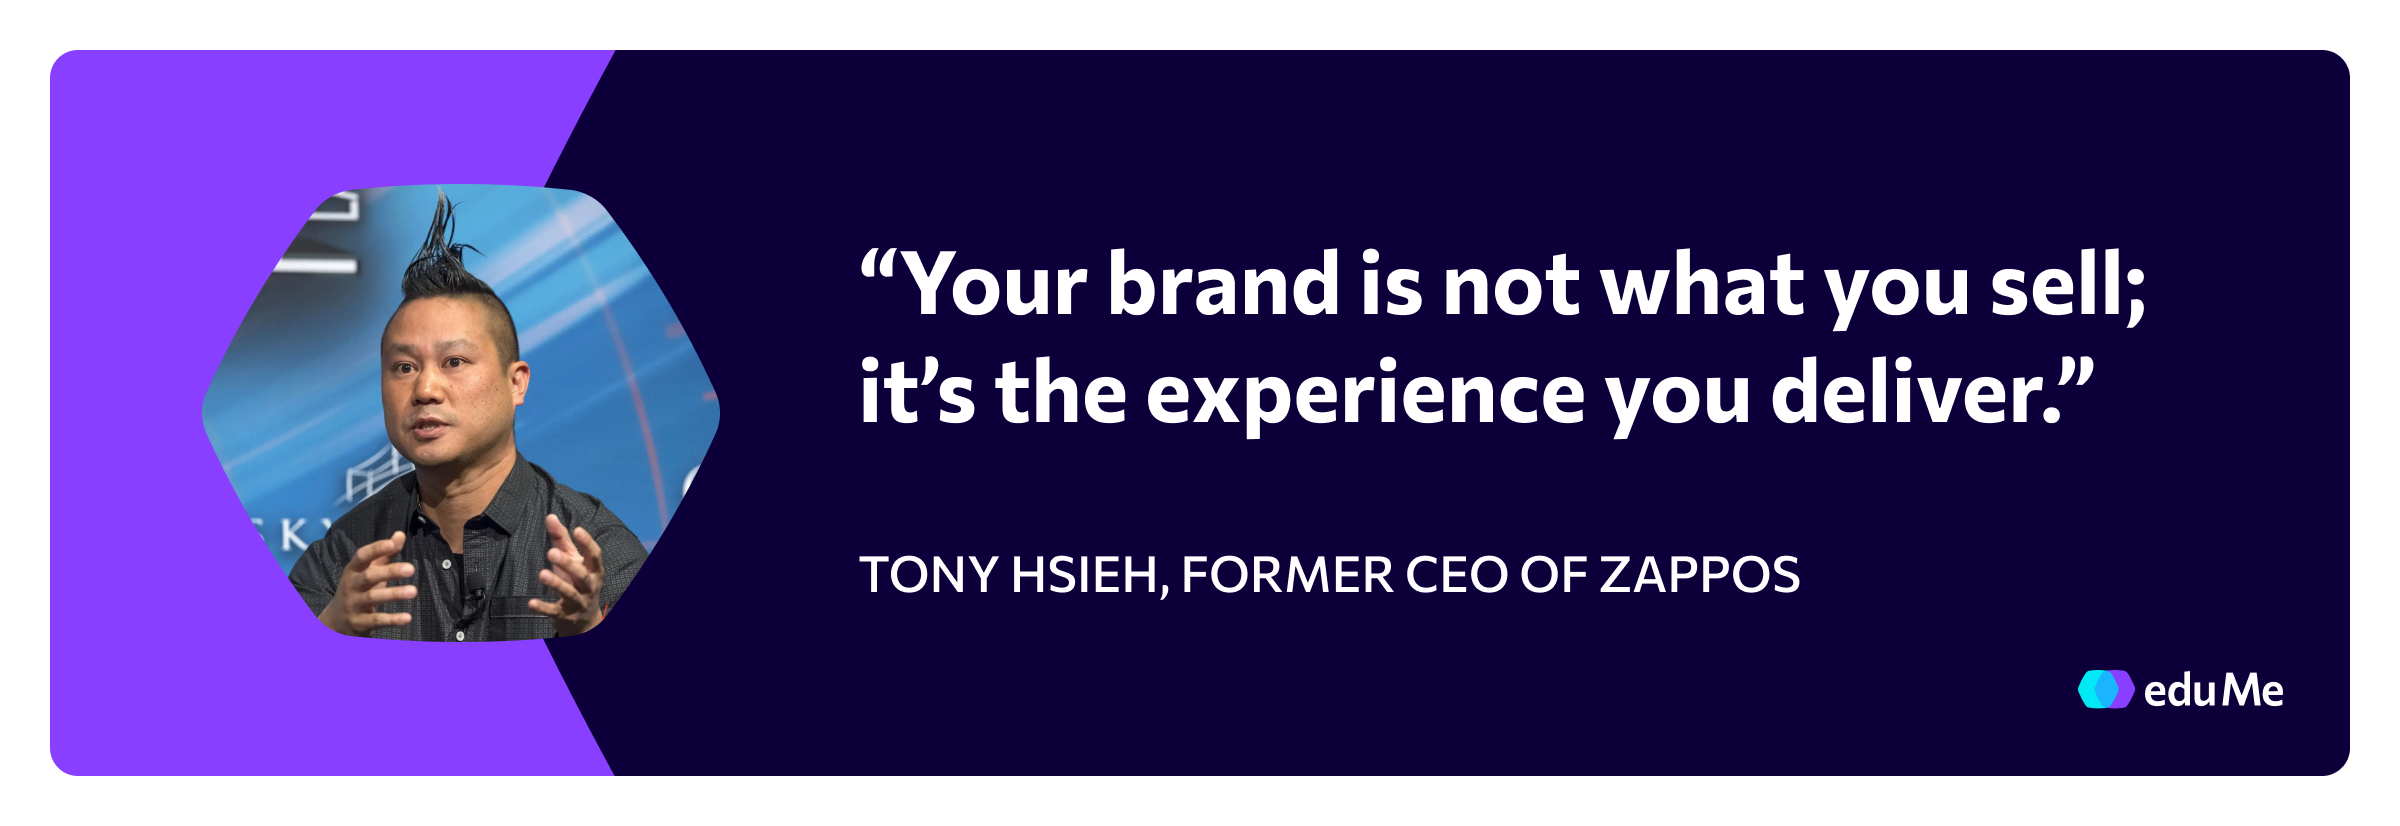 Customer experience quote, Zappos CEO Tony Hsieh